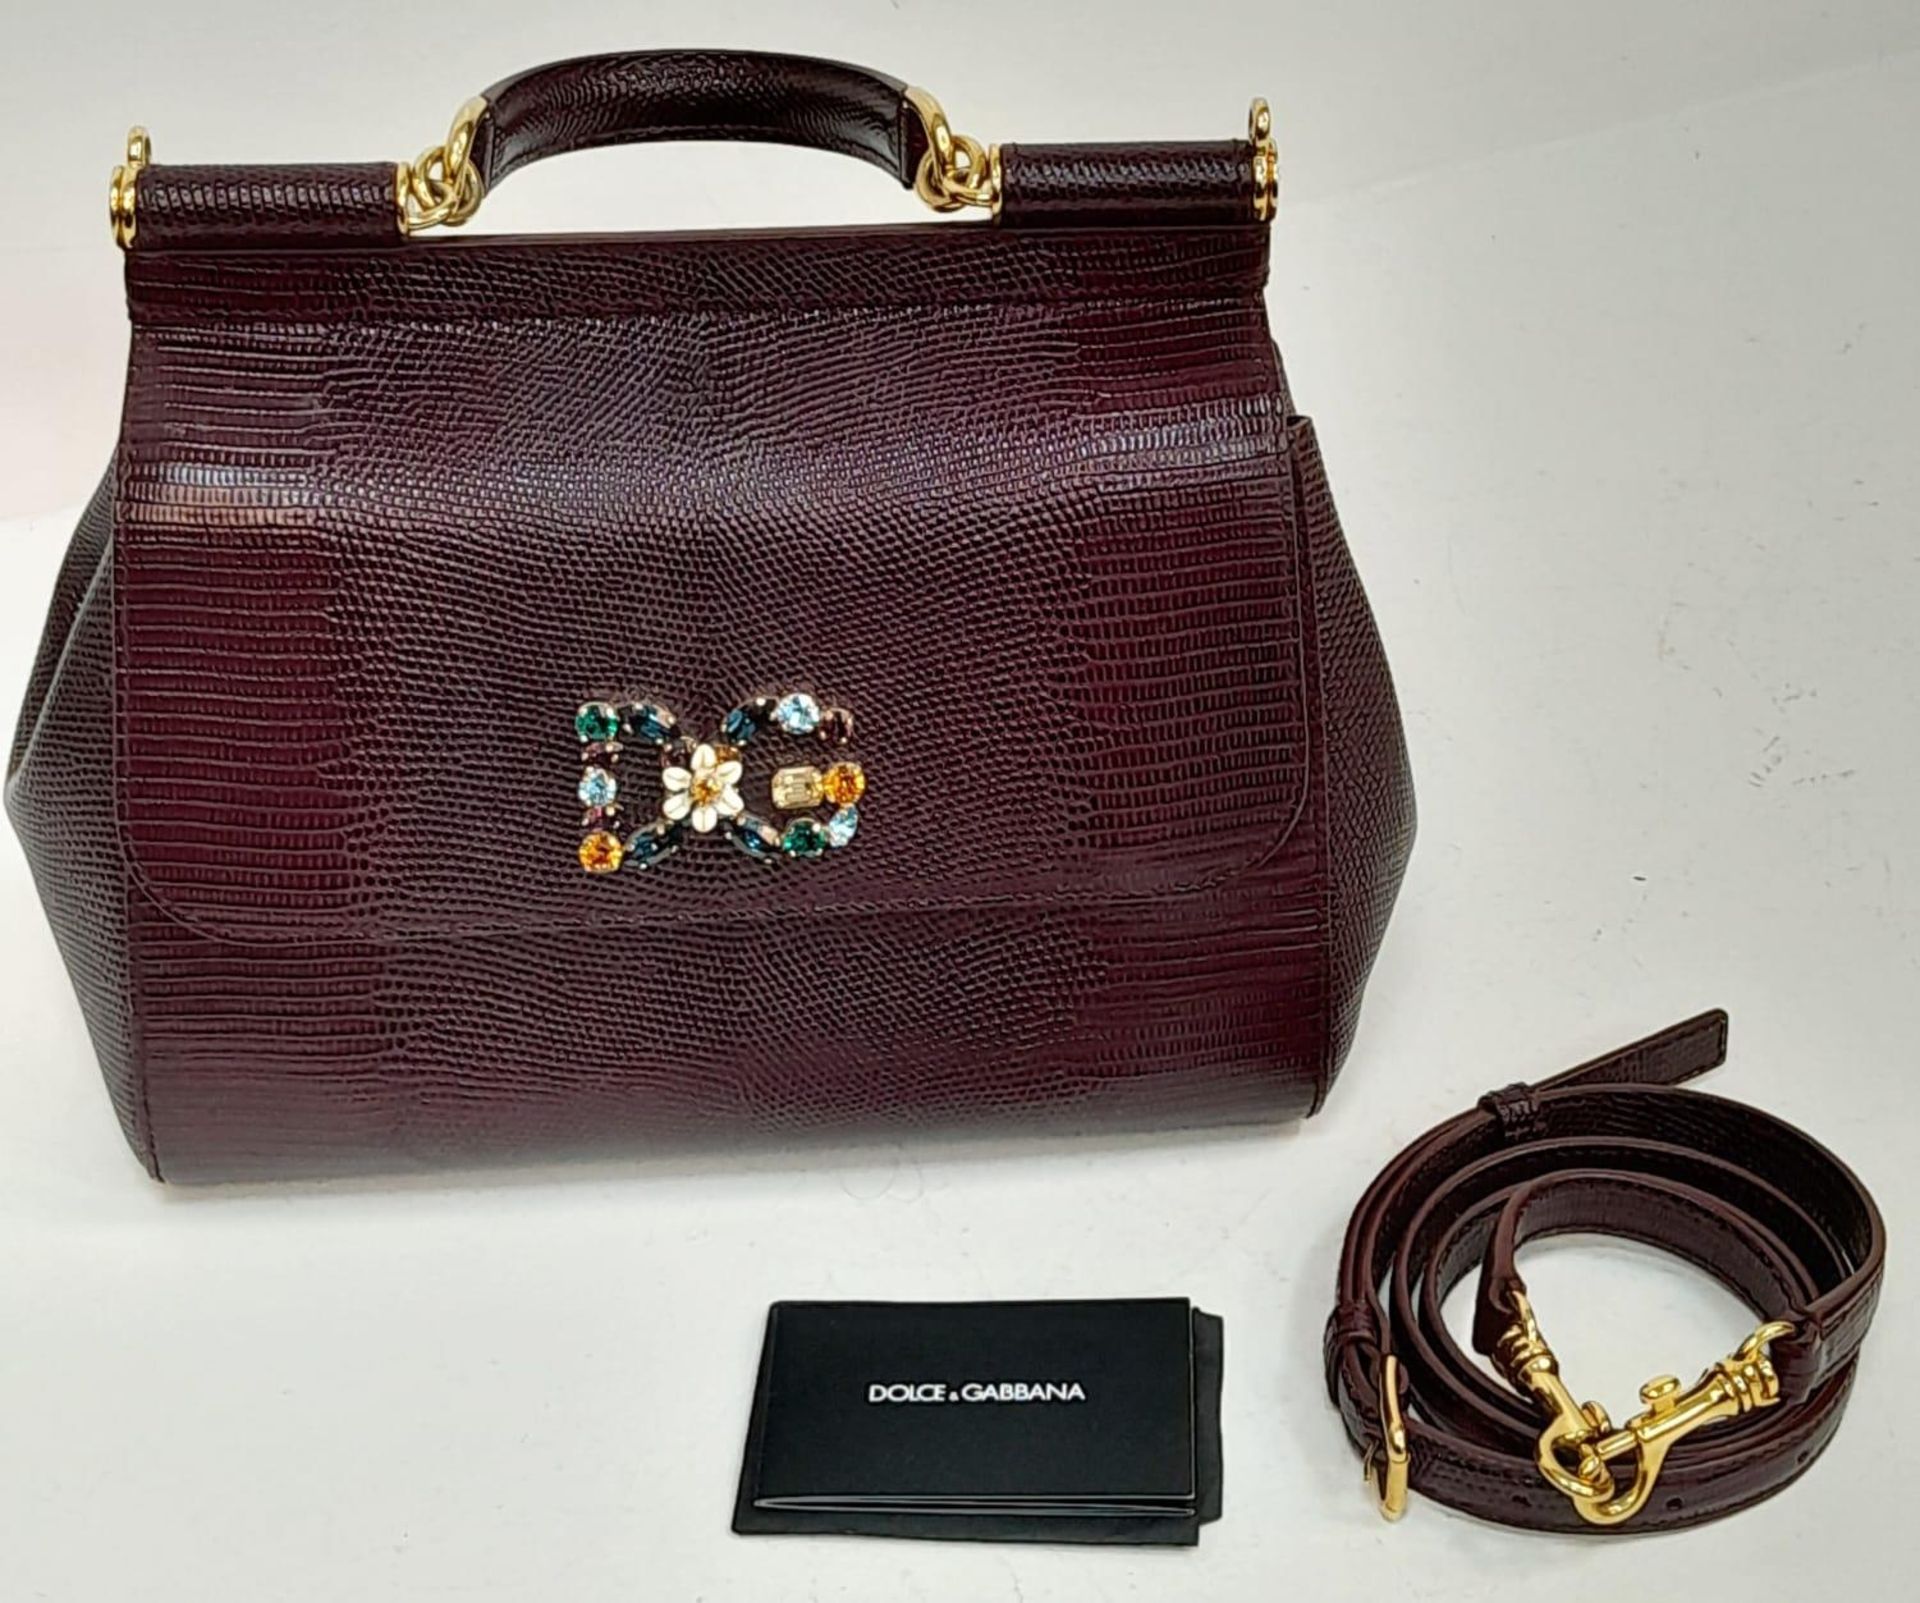 A Dolce & Gabbana Burgundy Miss Sicily Bag. Reptile embossed leather exterior with gold-toned